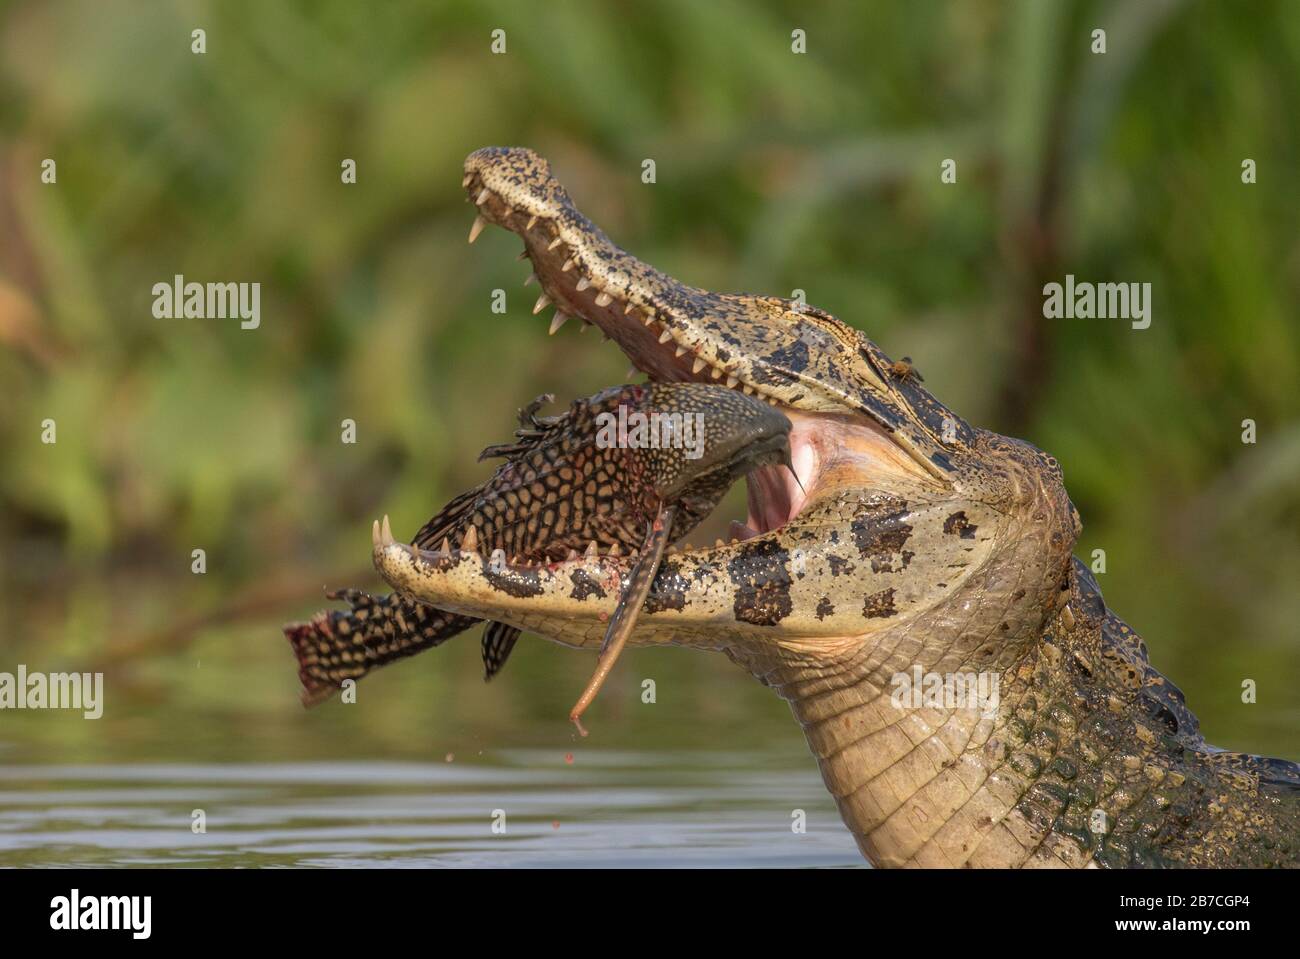 Caiman eating a fish in the Pantanal, Brazil Stock Photo